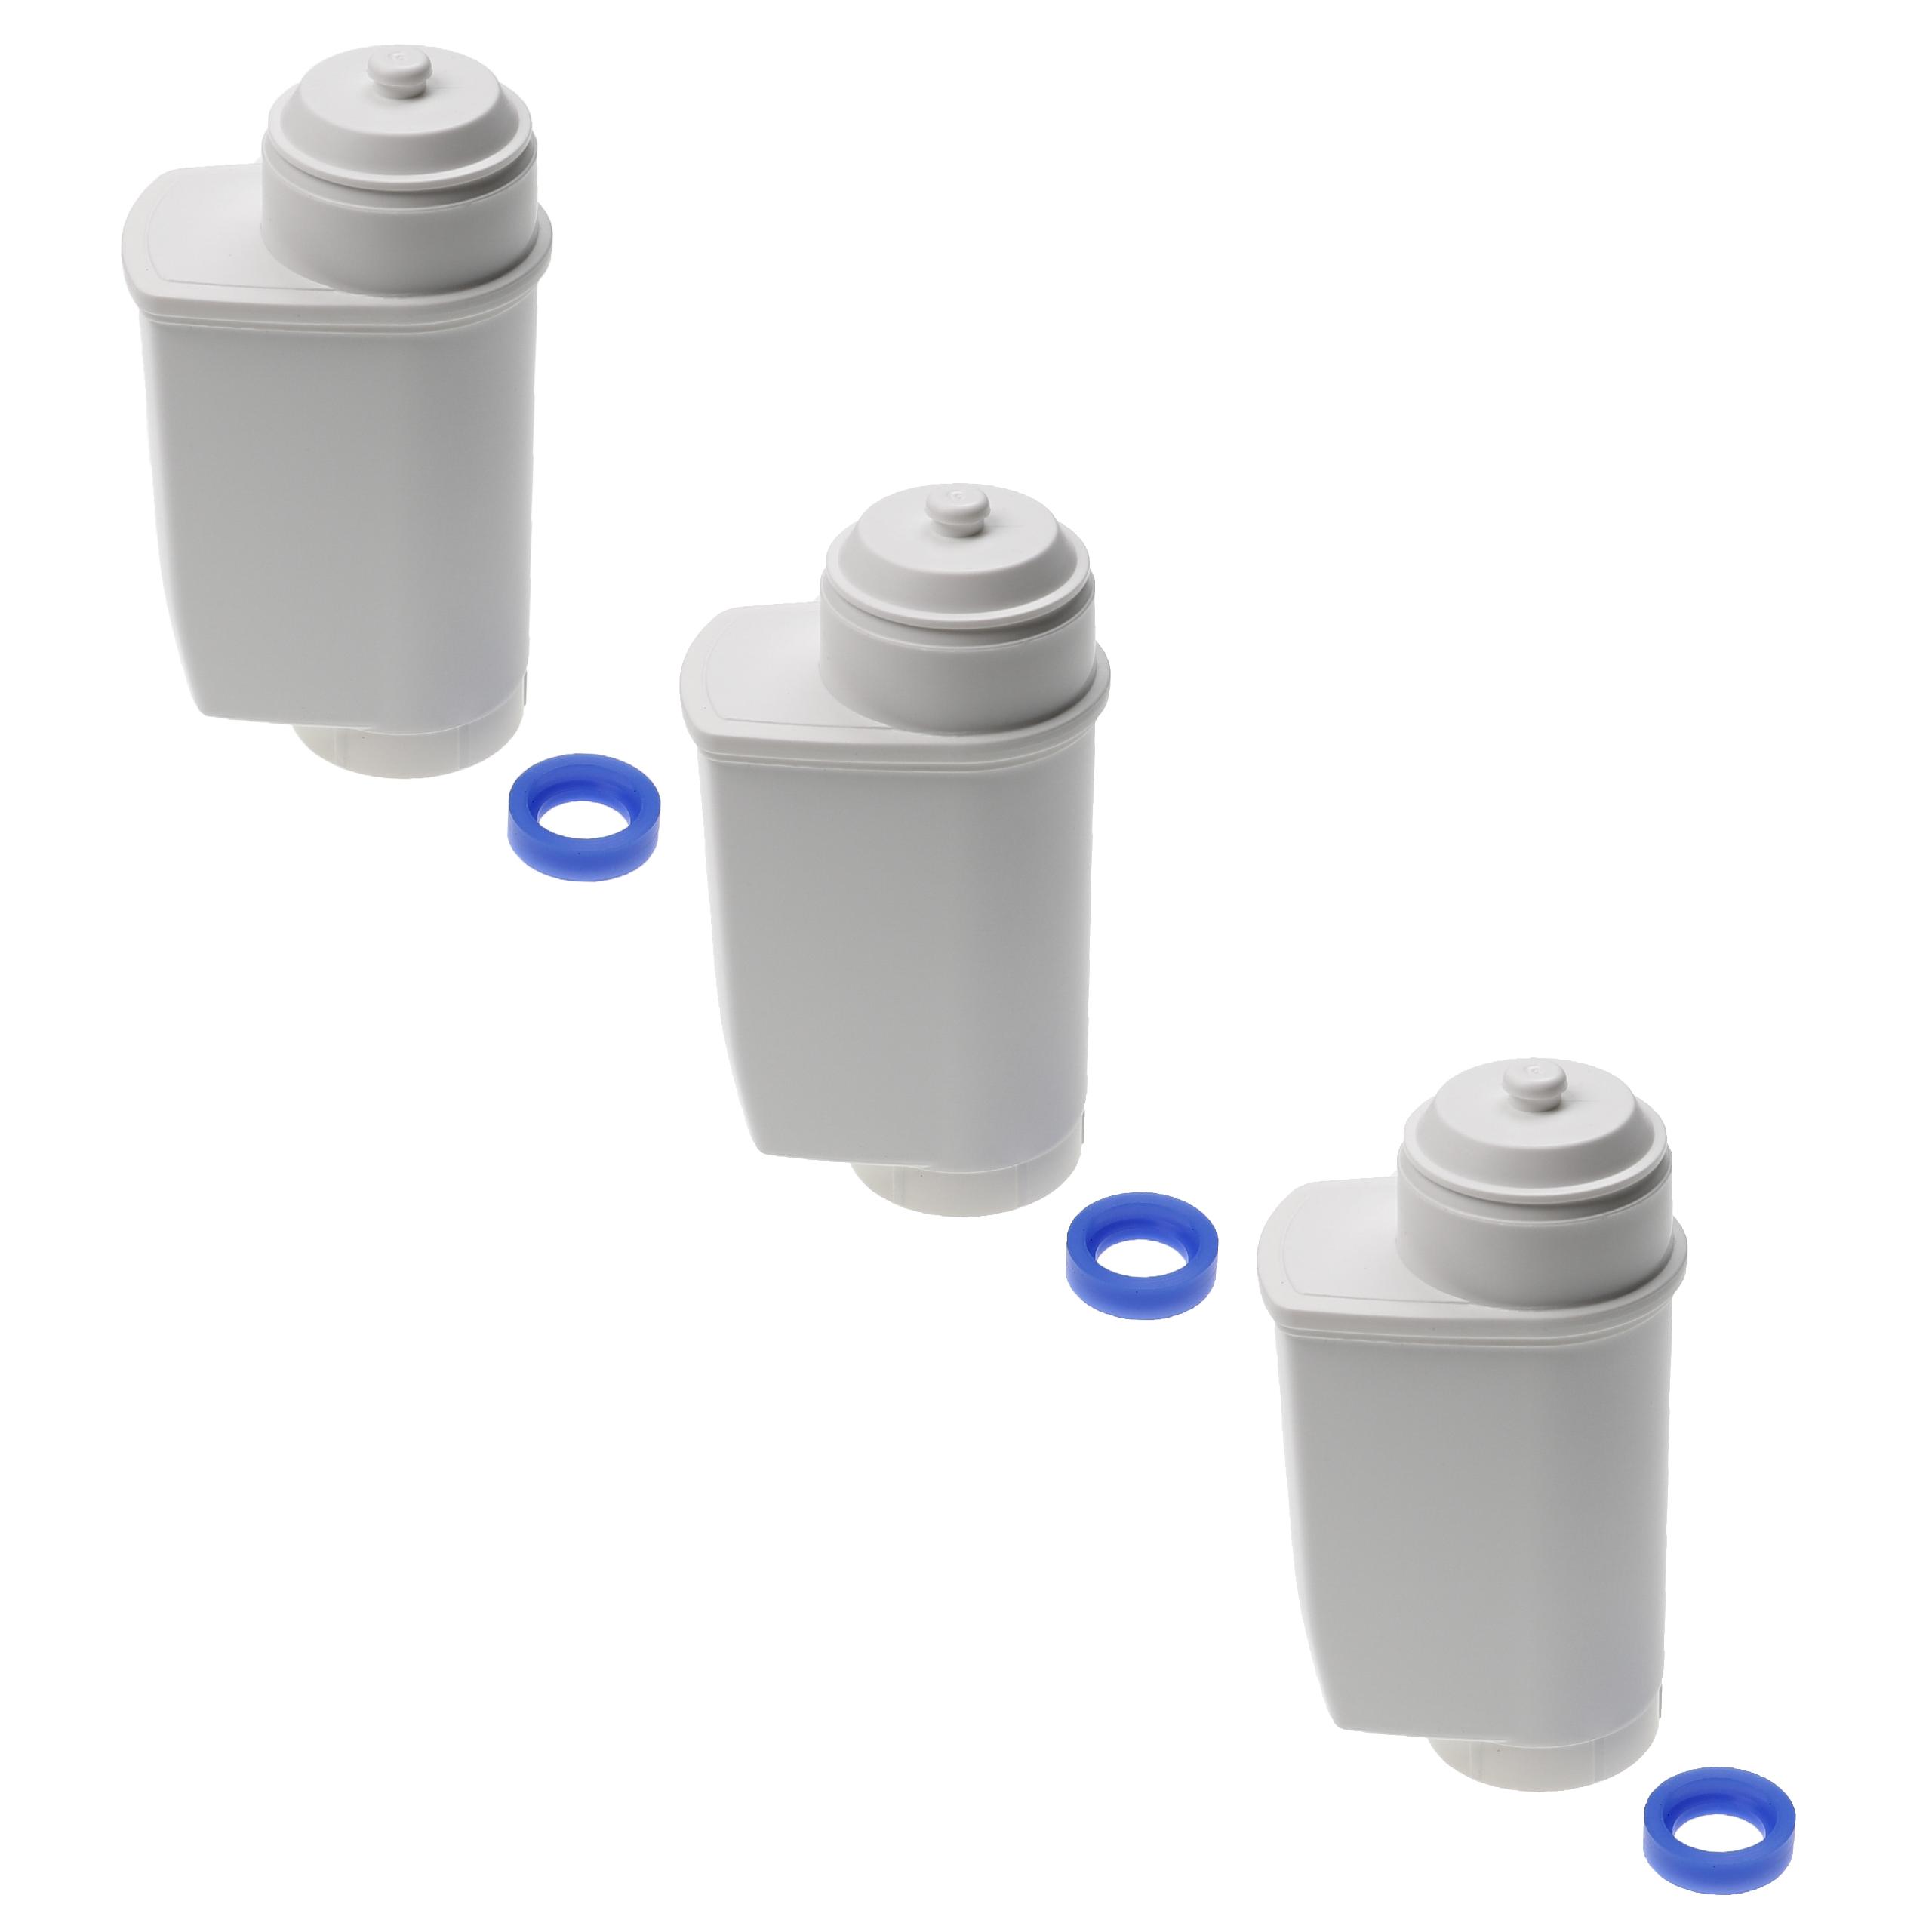 3x Water Filter replaces Siemens TZ70033 for Bosch Coffee Machine etc. - White